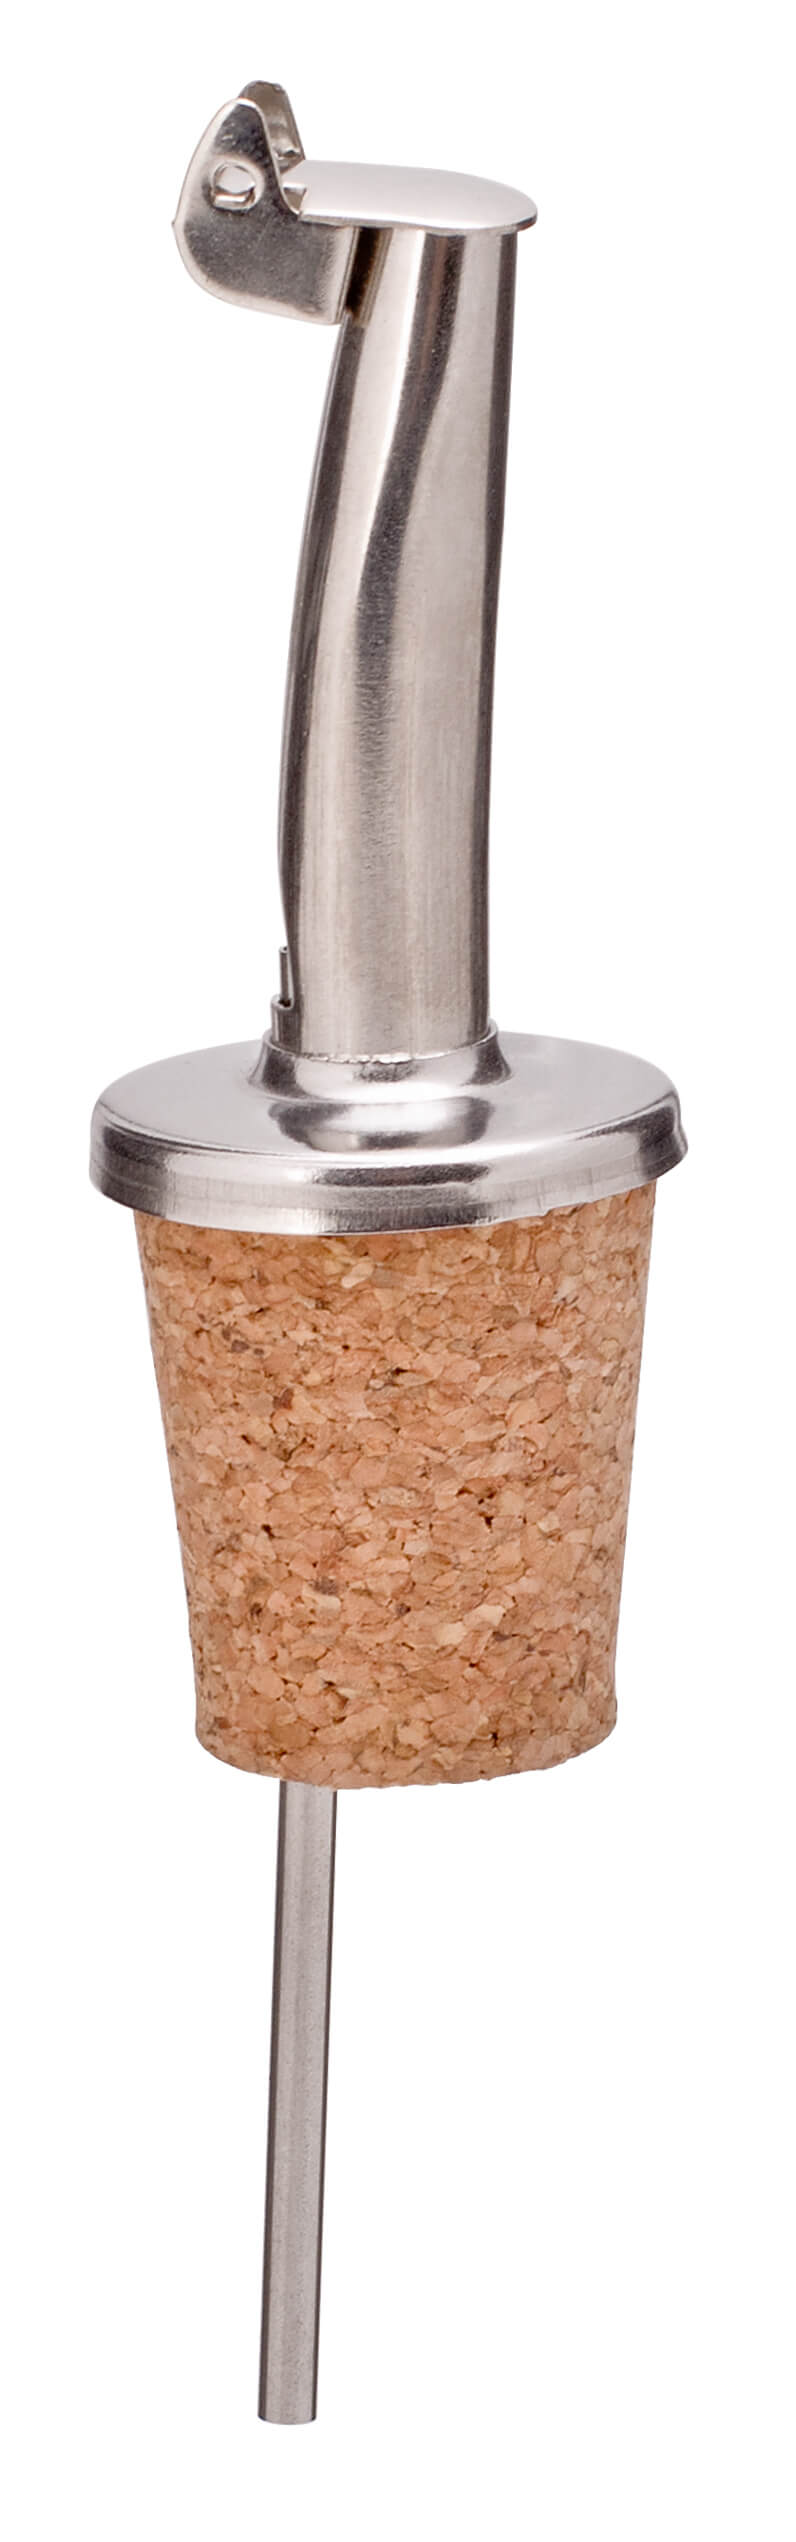 Pourer with cap - metal, natural cork (very slow)